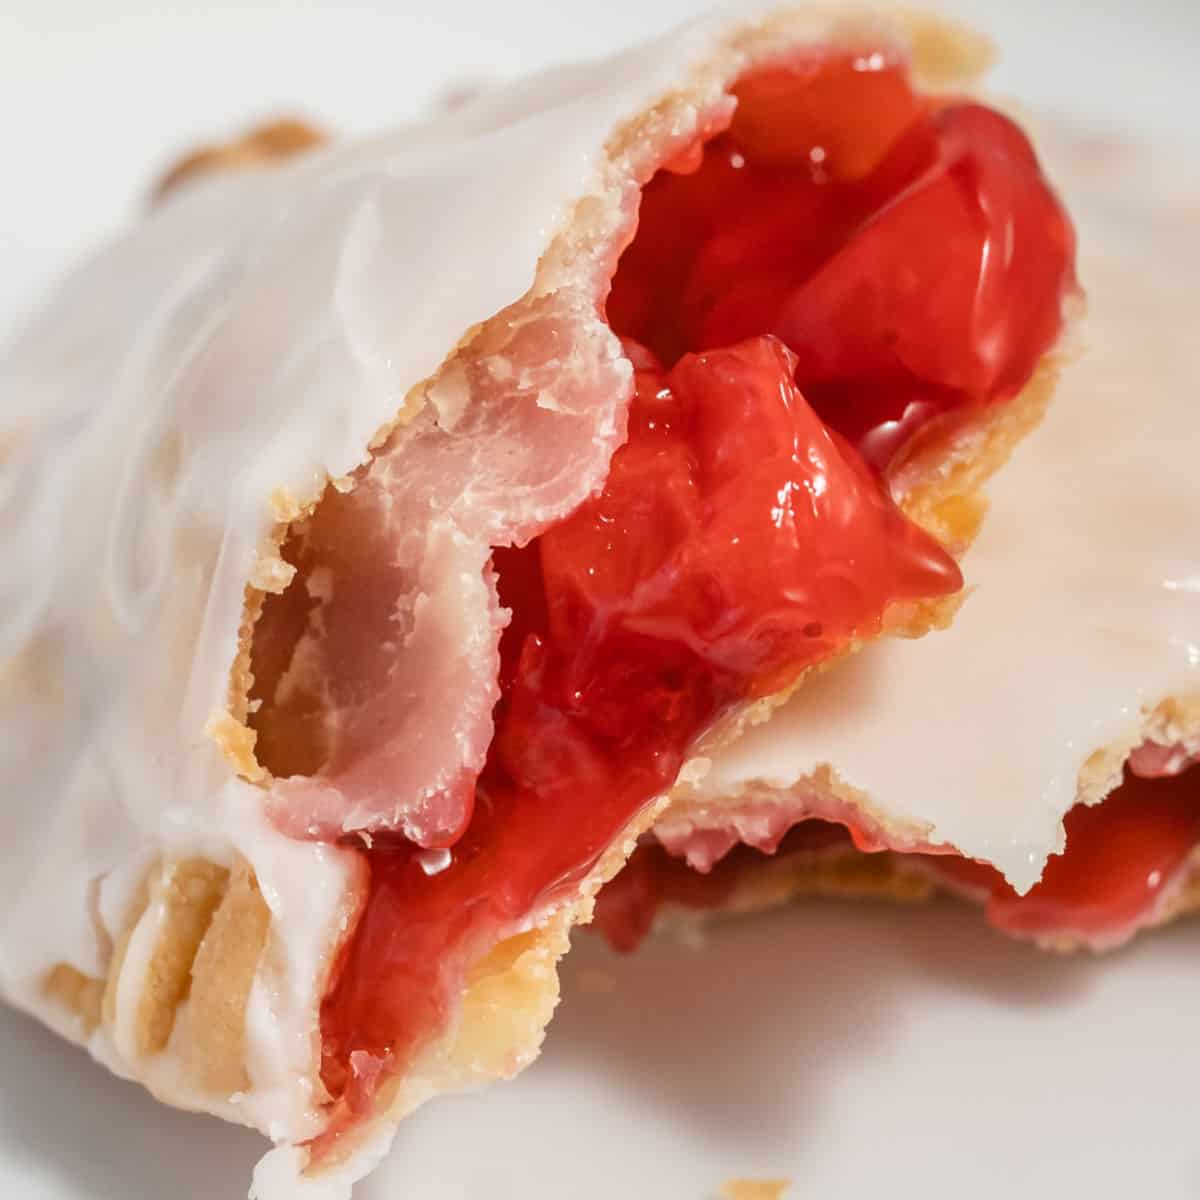 square image of cherry hand pie broken in half to shown filling